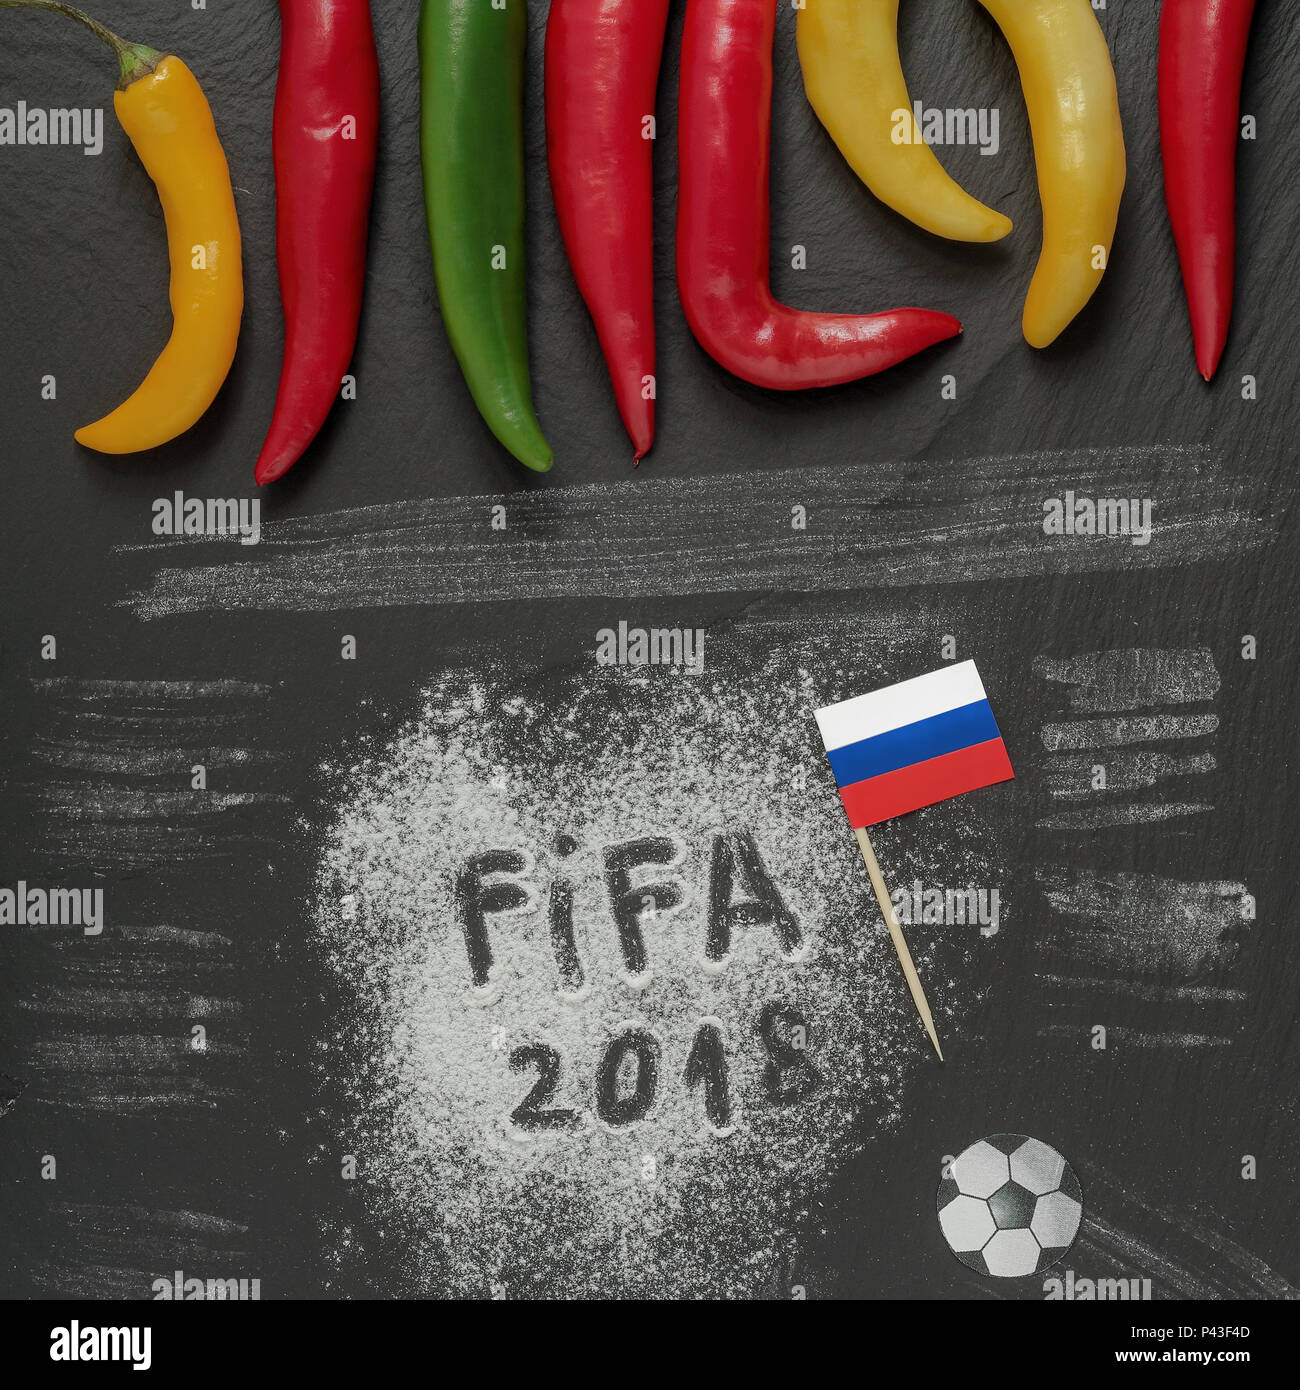 Fifa world cup 2018 Russia,flour writing with DIY paper flag,soccer ball and some hot chilli peppers. Stock Photo